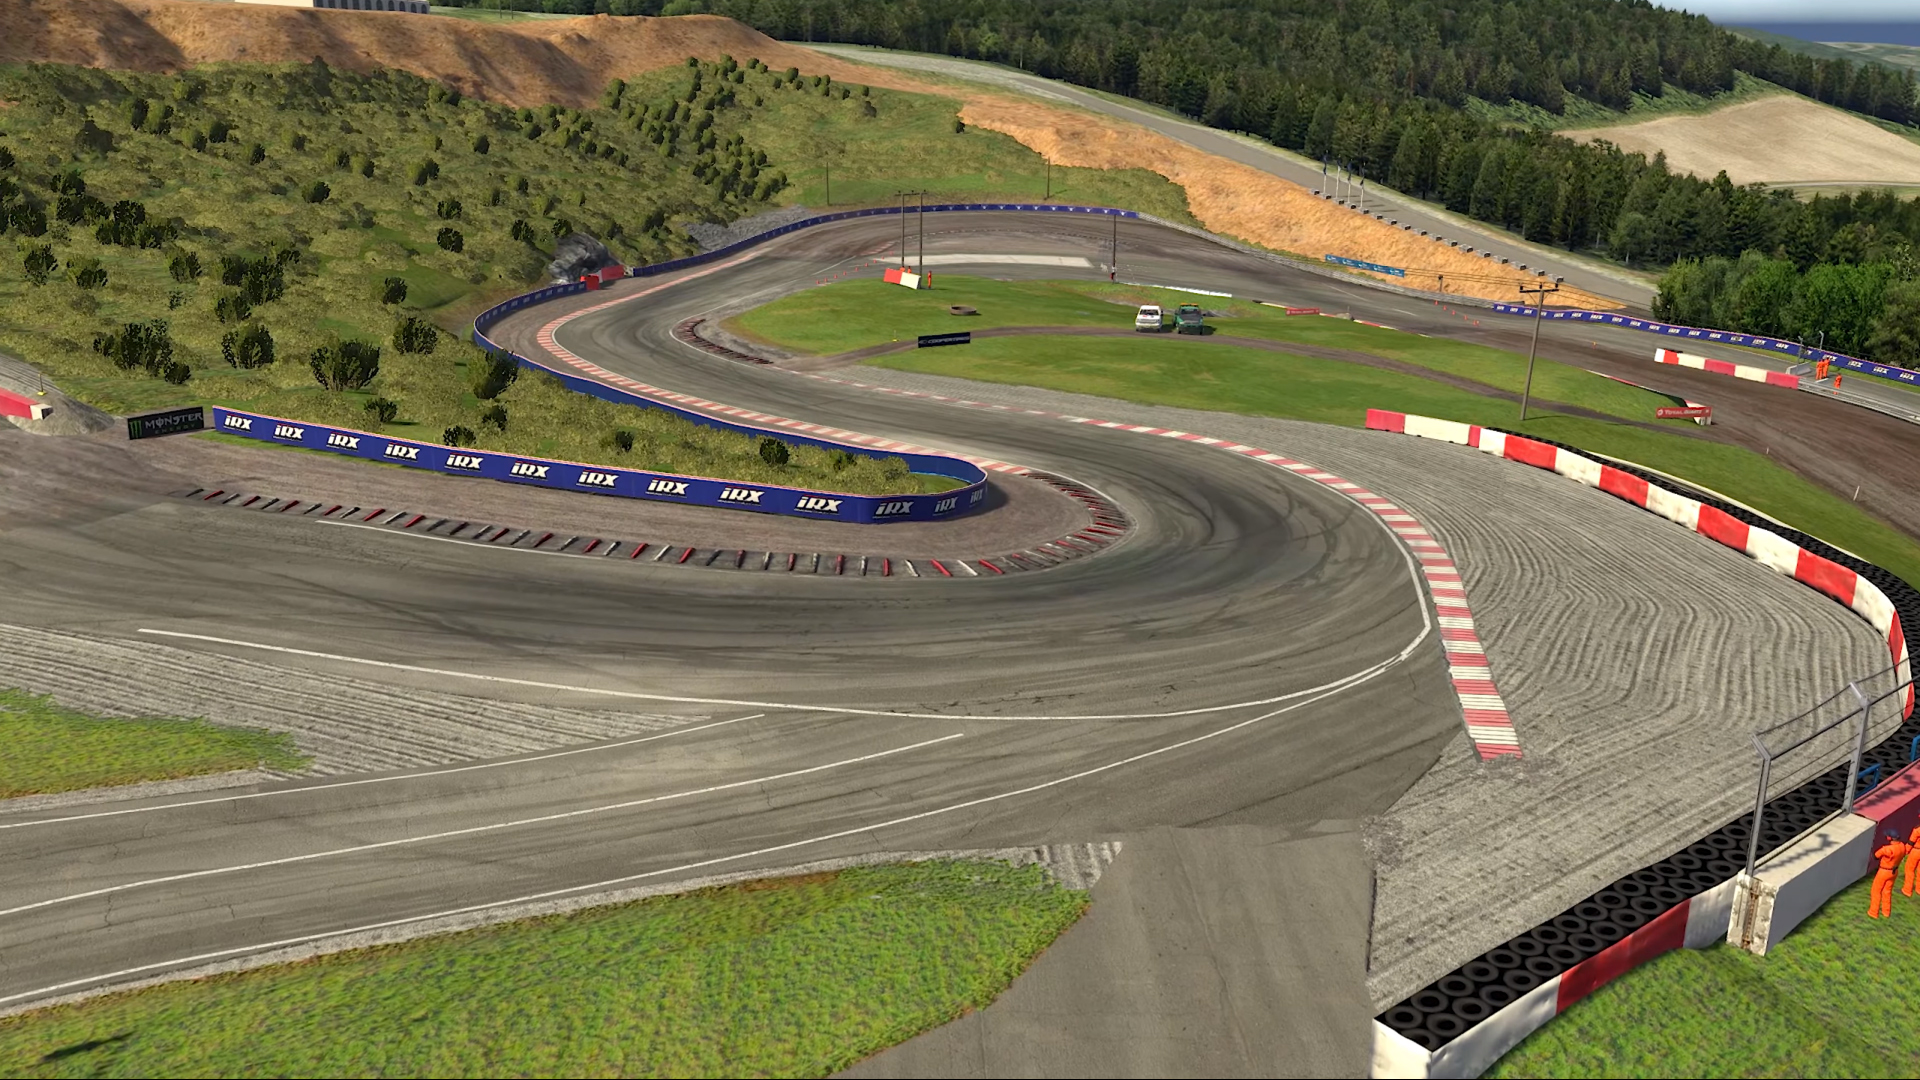 iRacing 2020 Season 2 Update Now Available Adds One Car, One Track